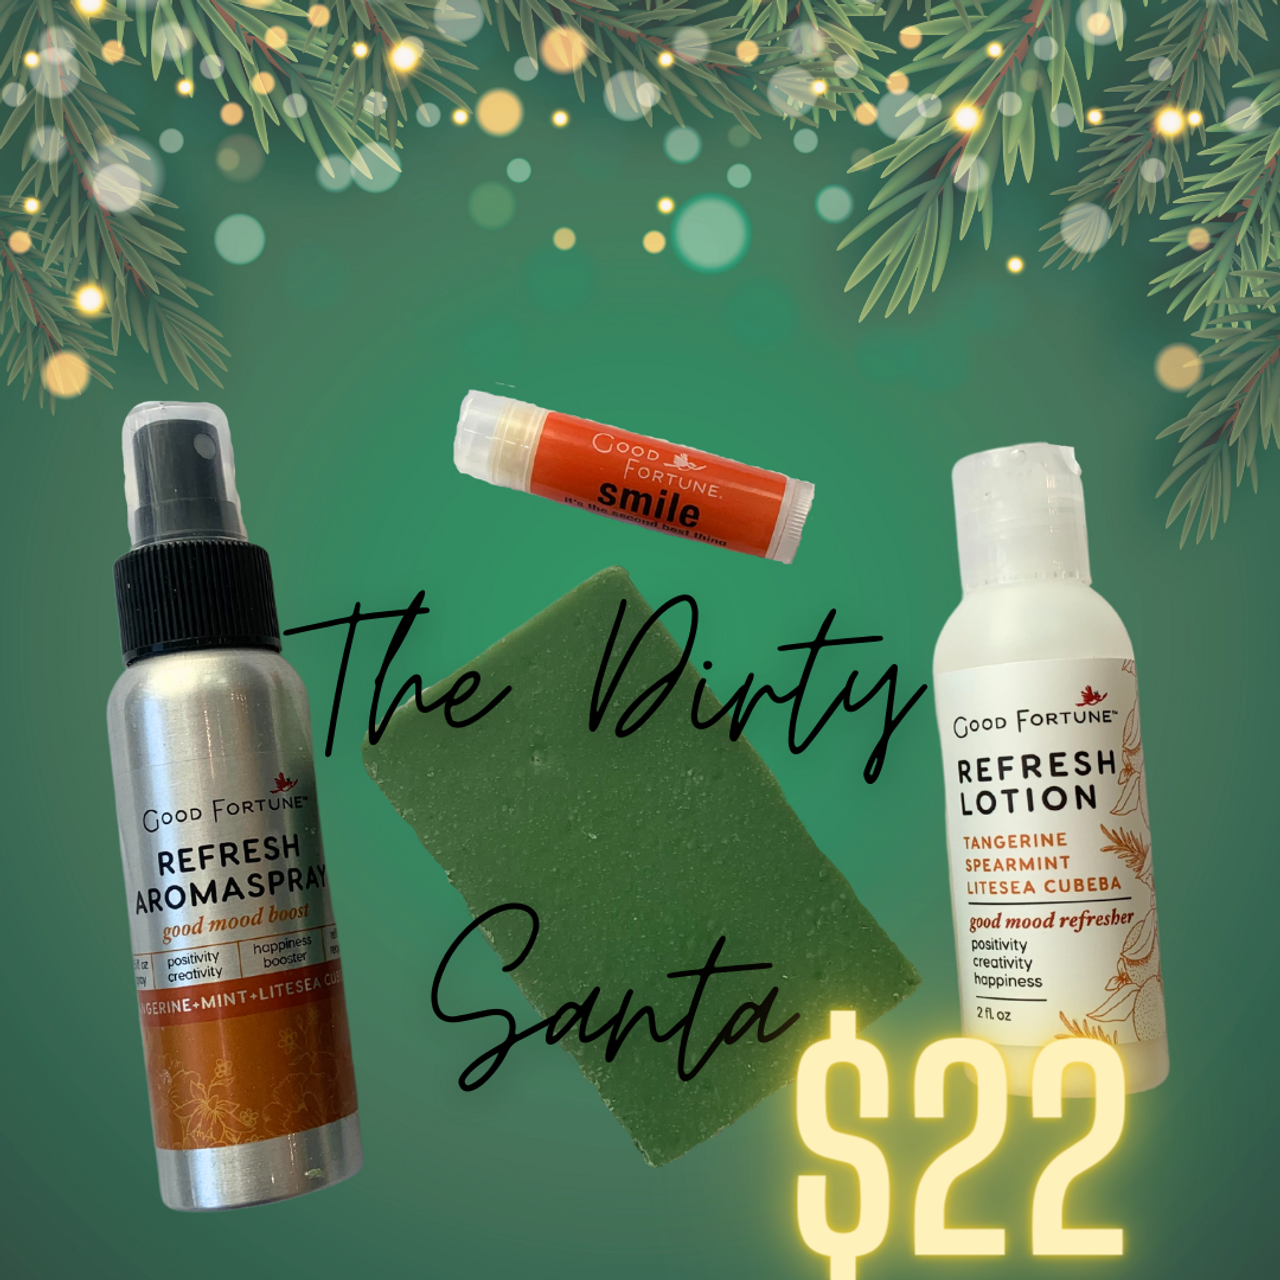 Shop All Holiday Gift Sets